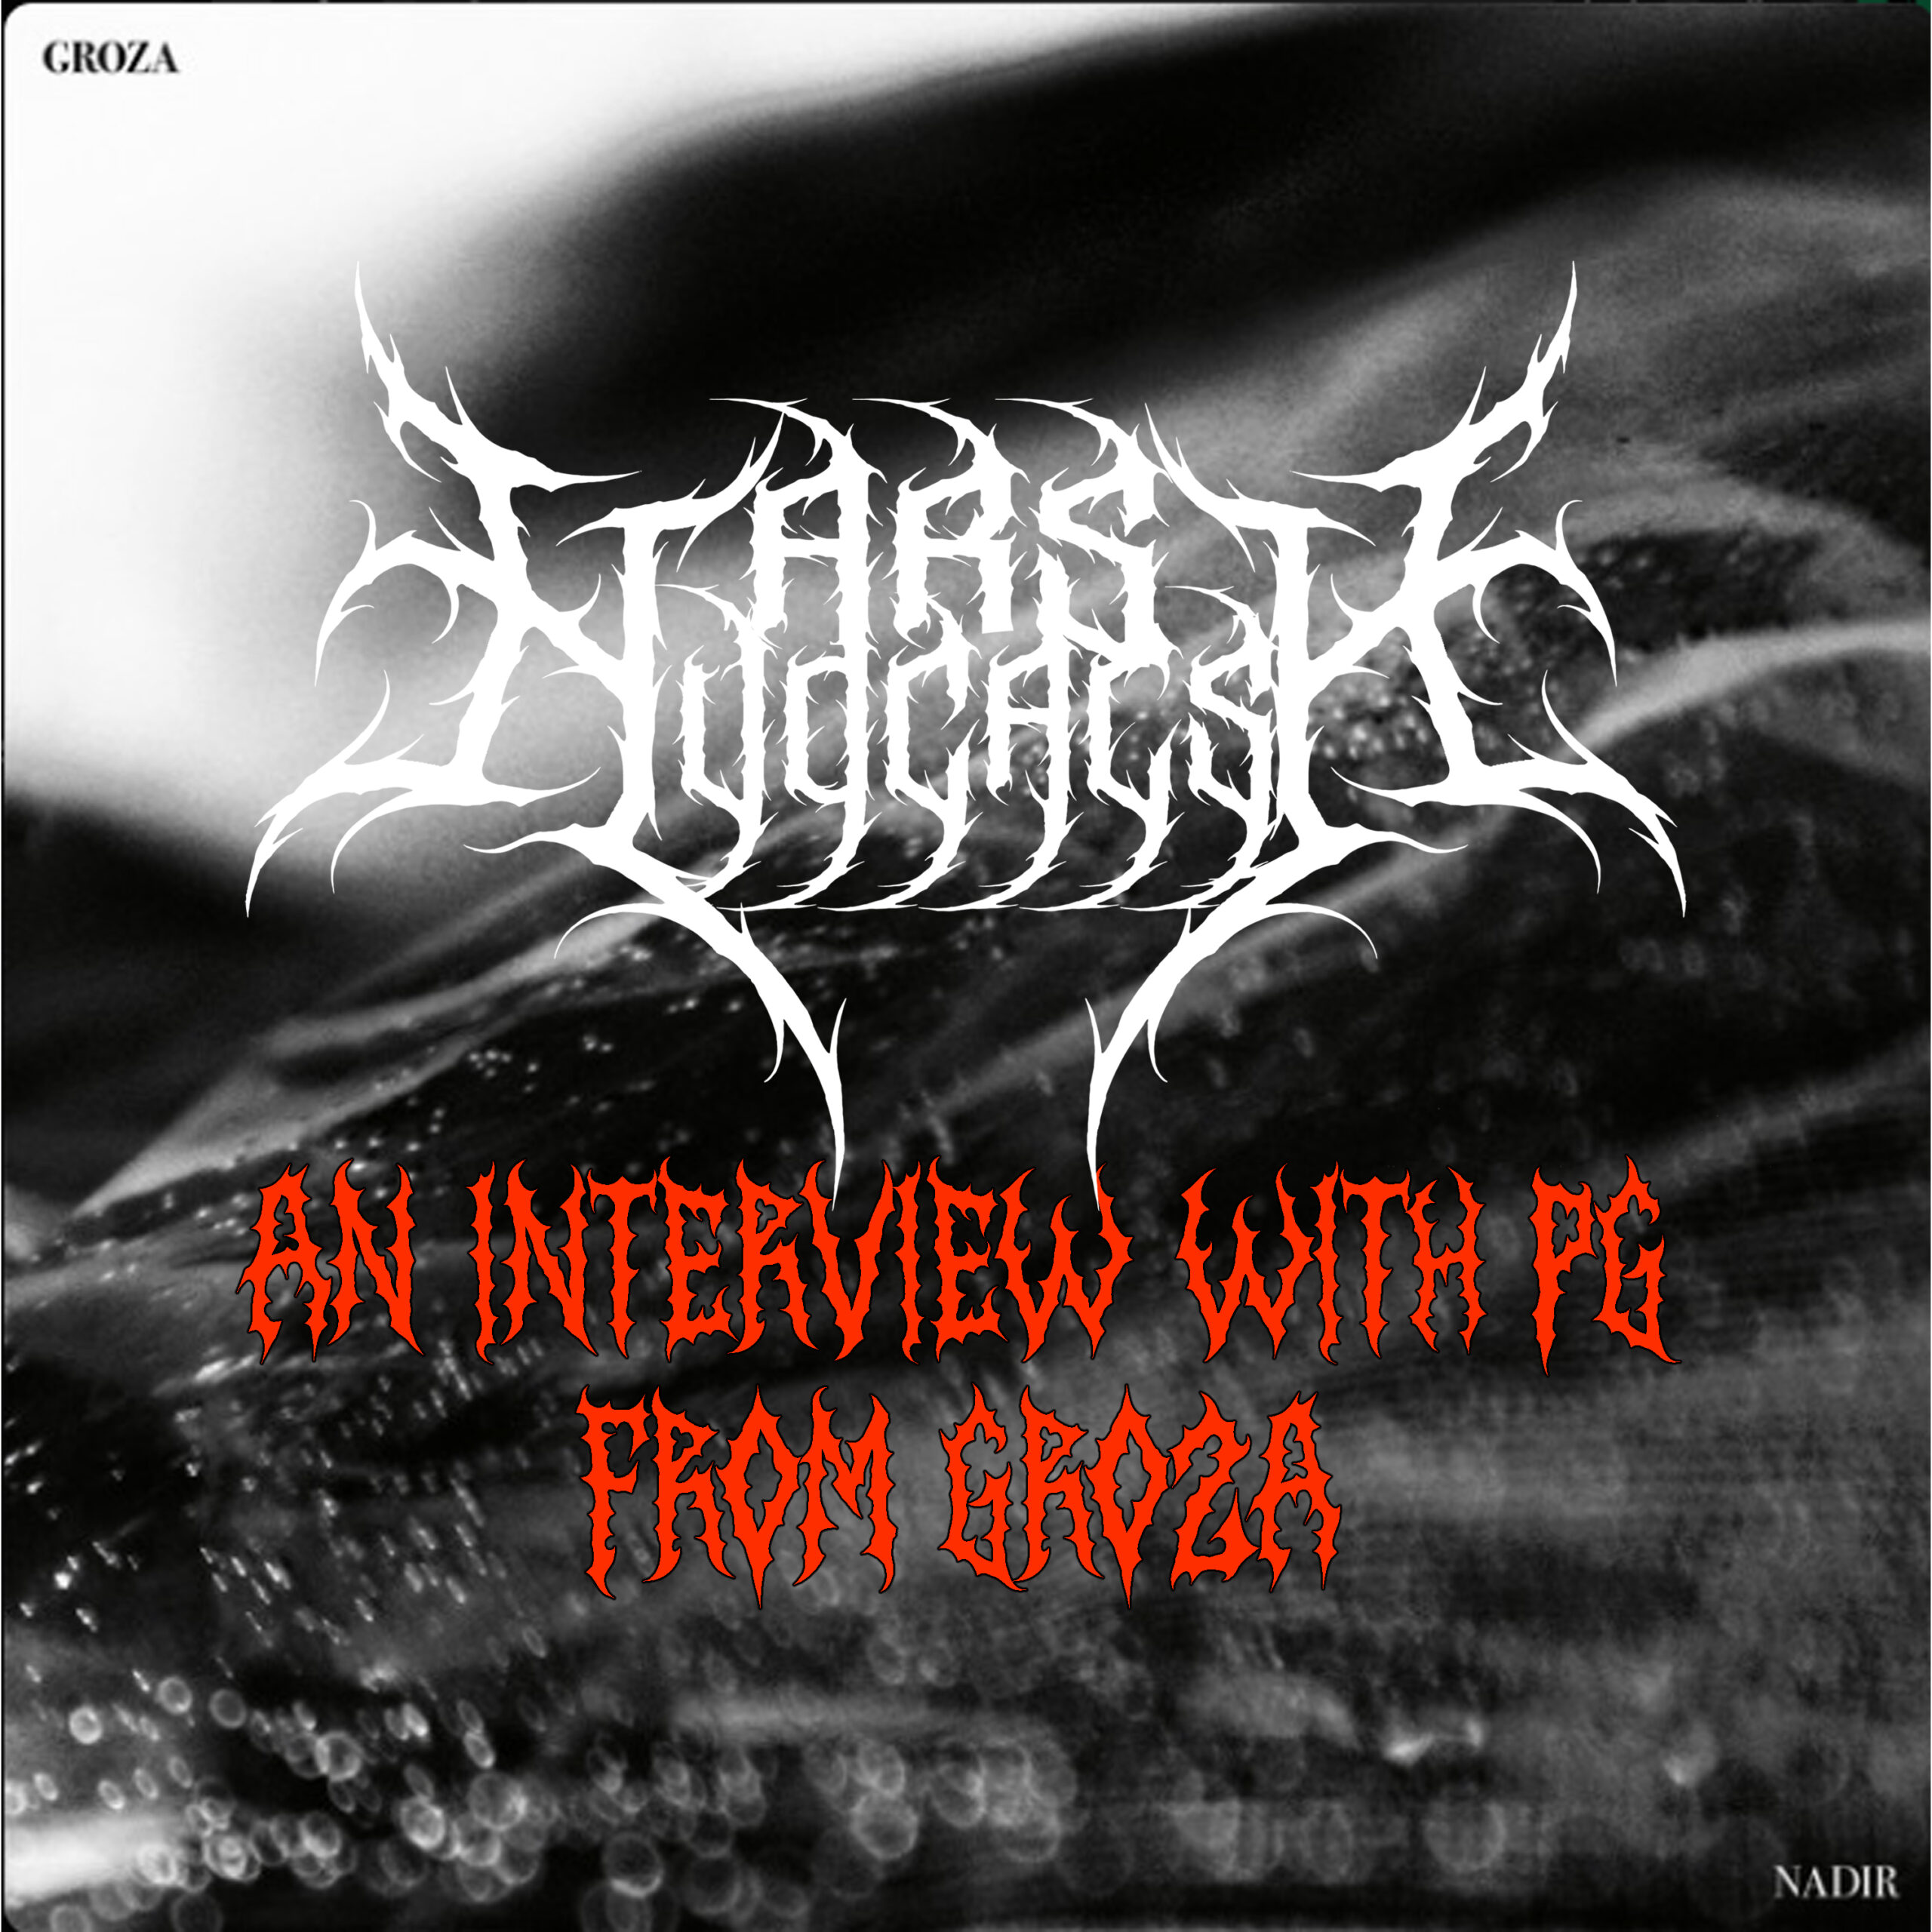 Harsh Vocals – An Interview with P.G. of Groza